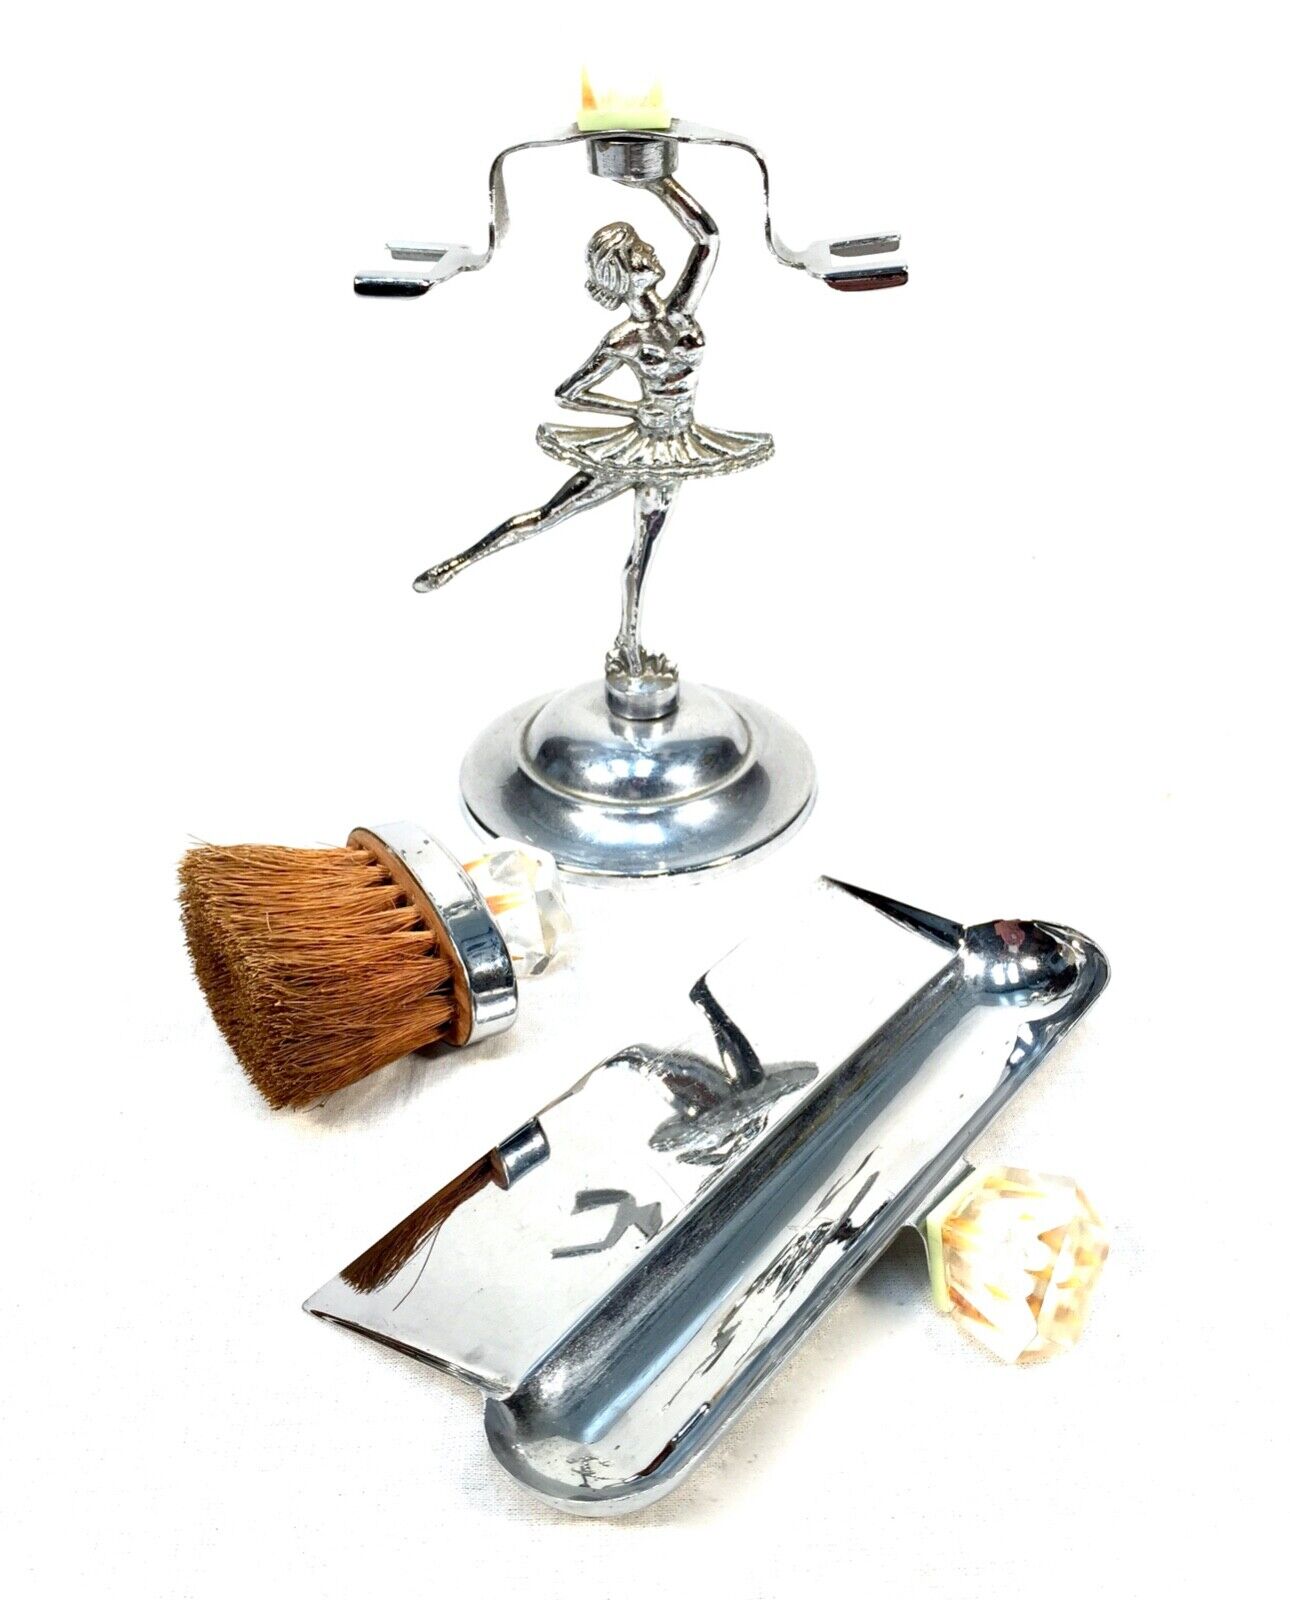 Antique Chrome & Lucite Table Crumb Brush and Tray Set Ballerina Art Deco Style